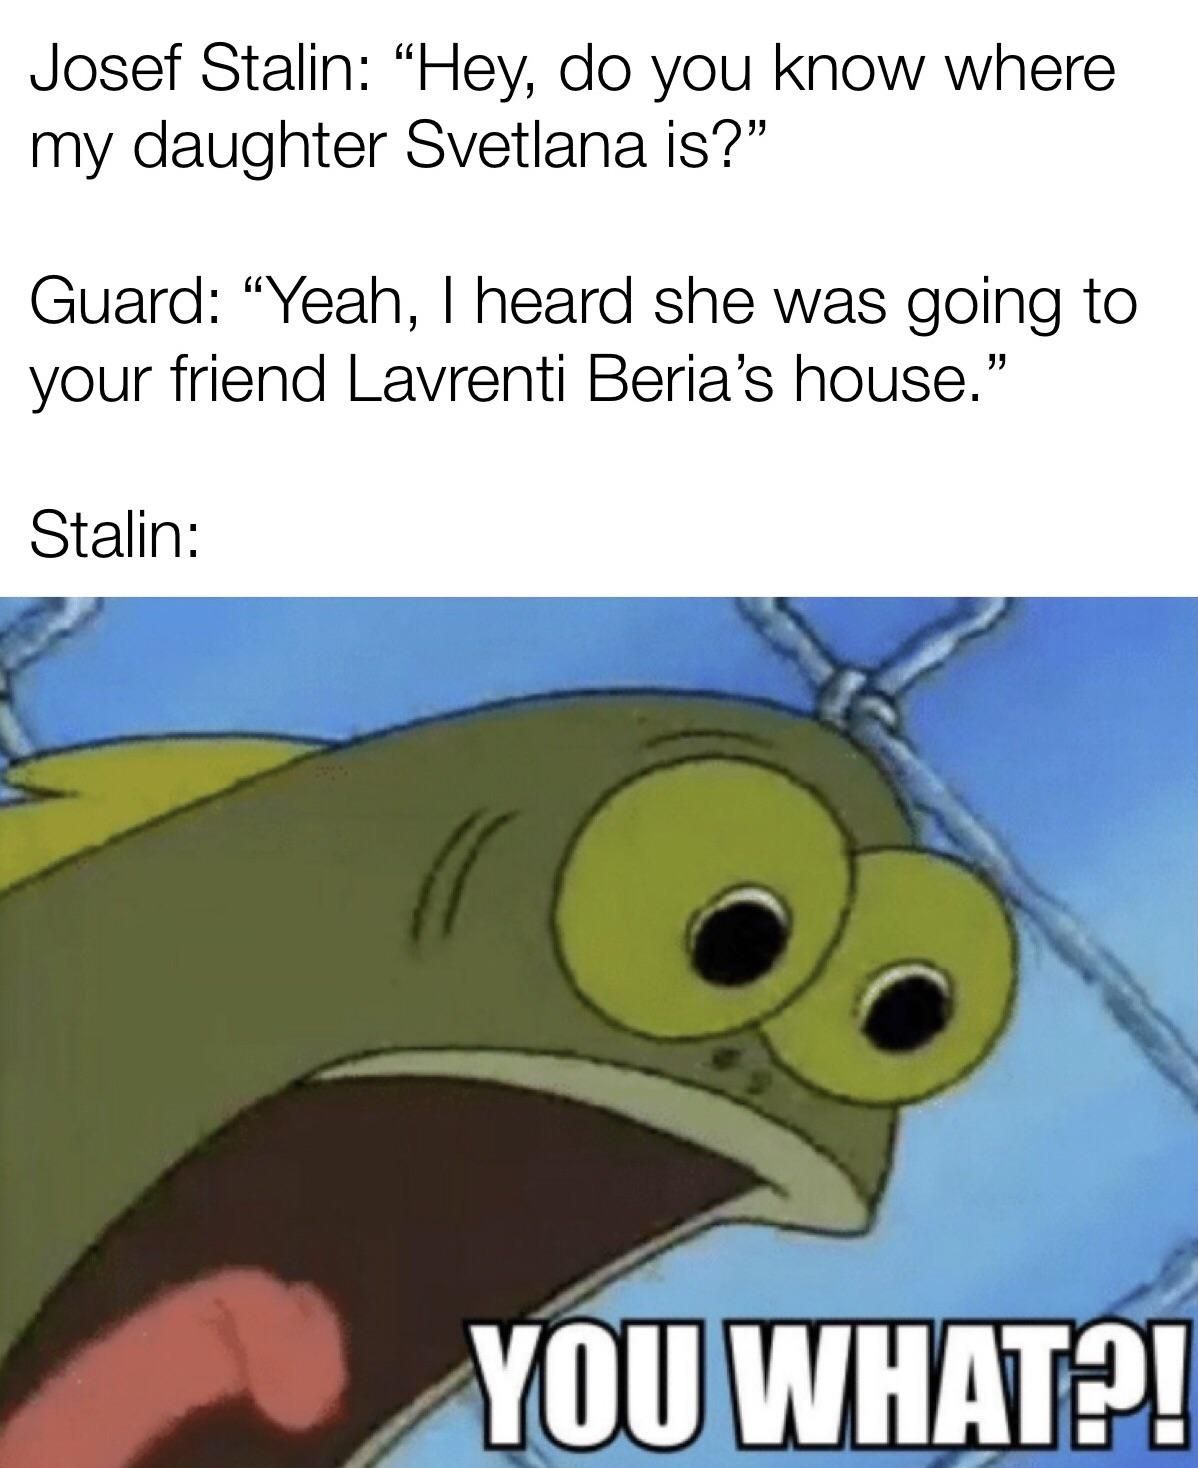 If you don’t know who Lavrenti Beria was, just know that Stalin was smart for telling his daughter to get the *** out of his house